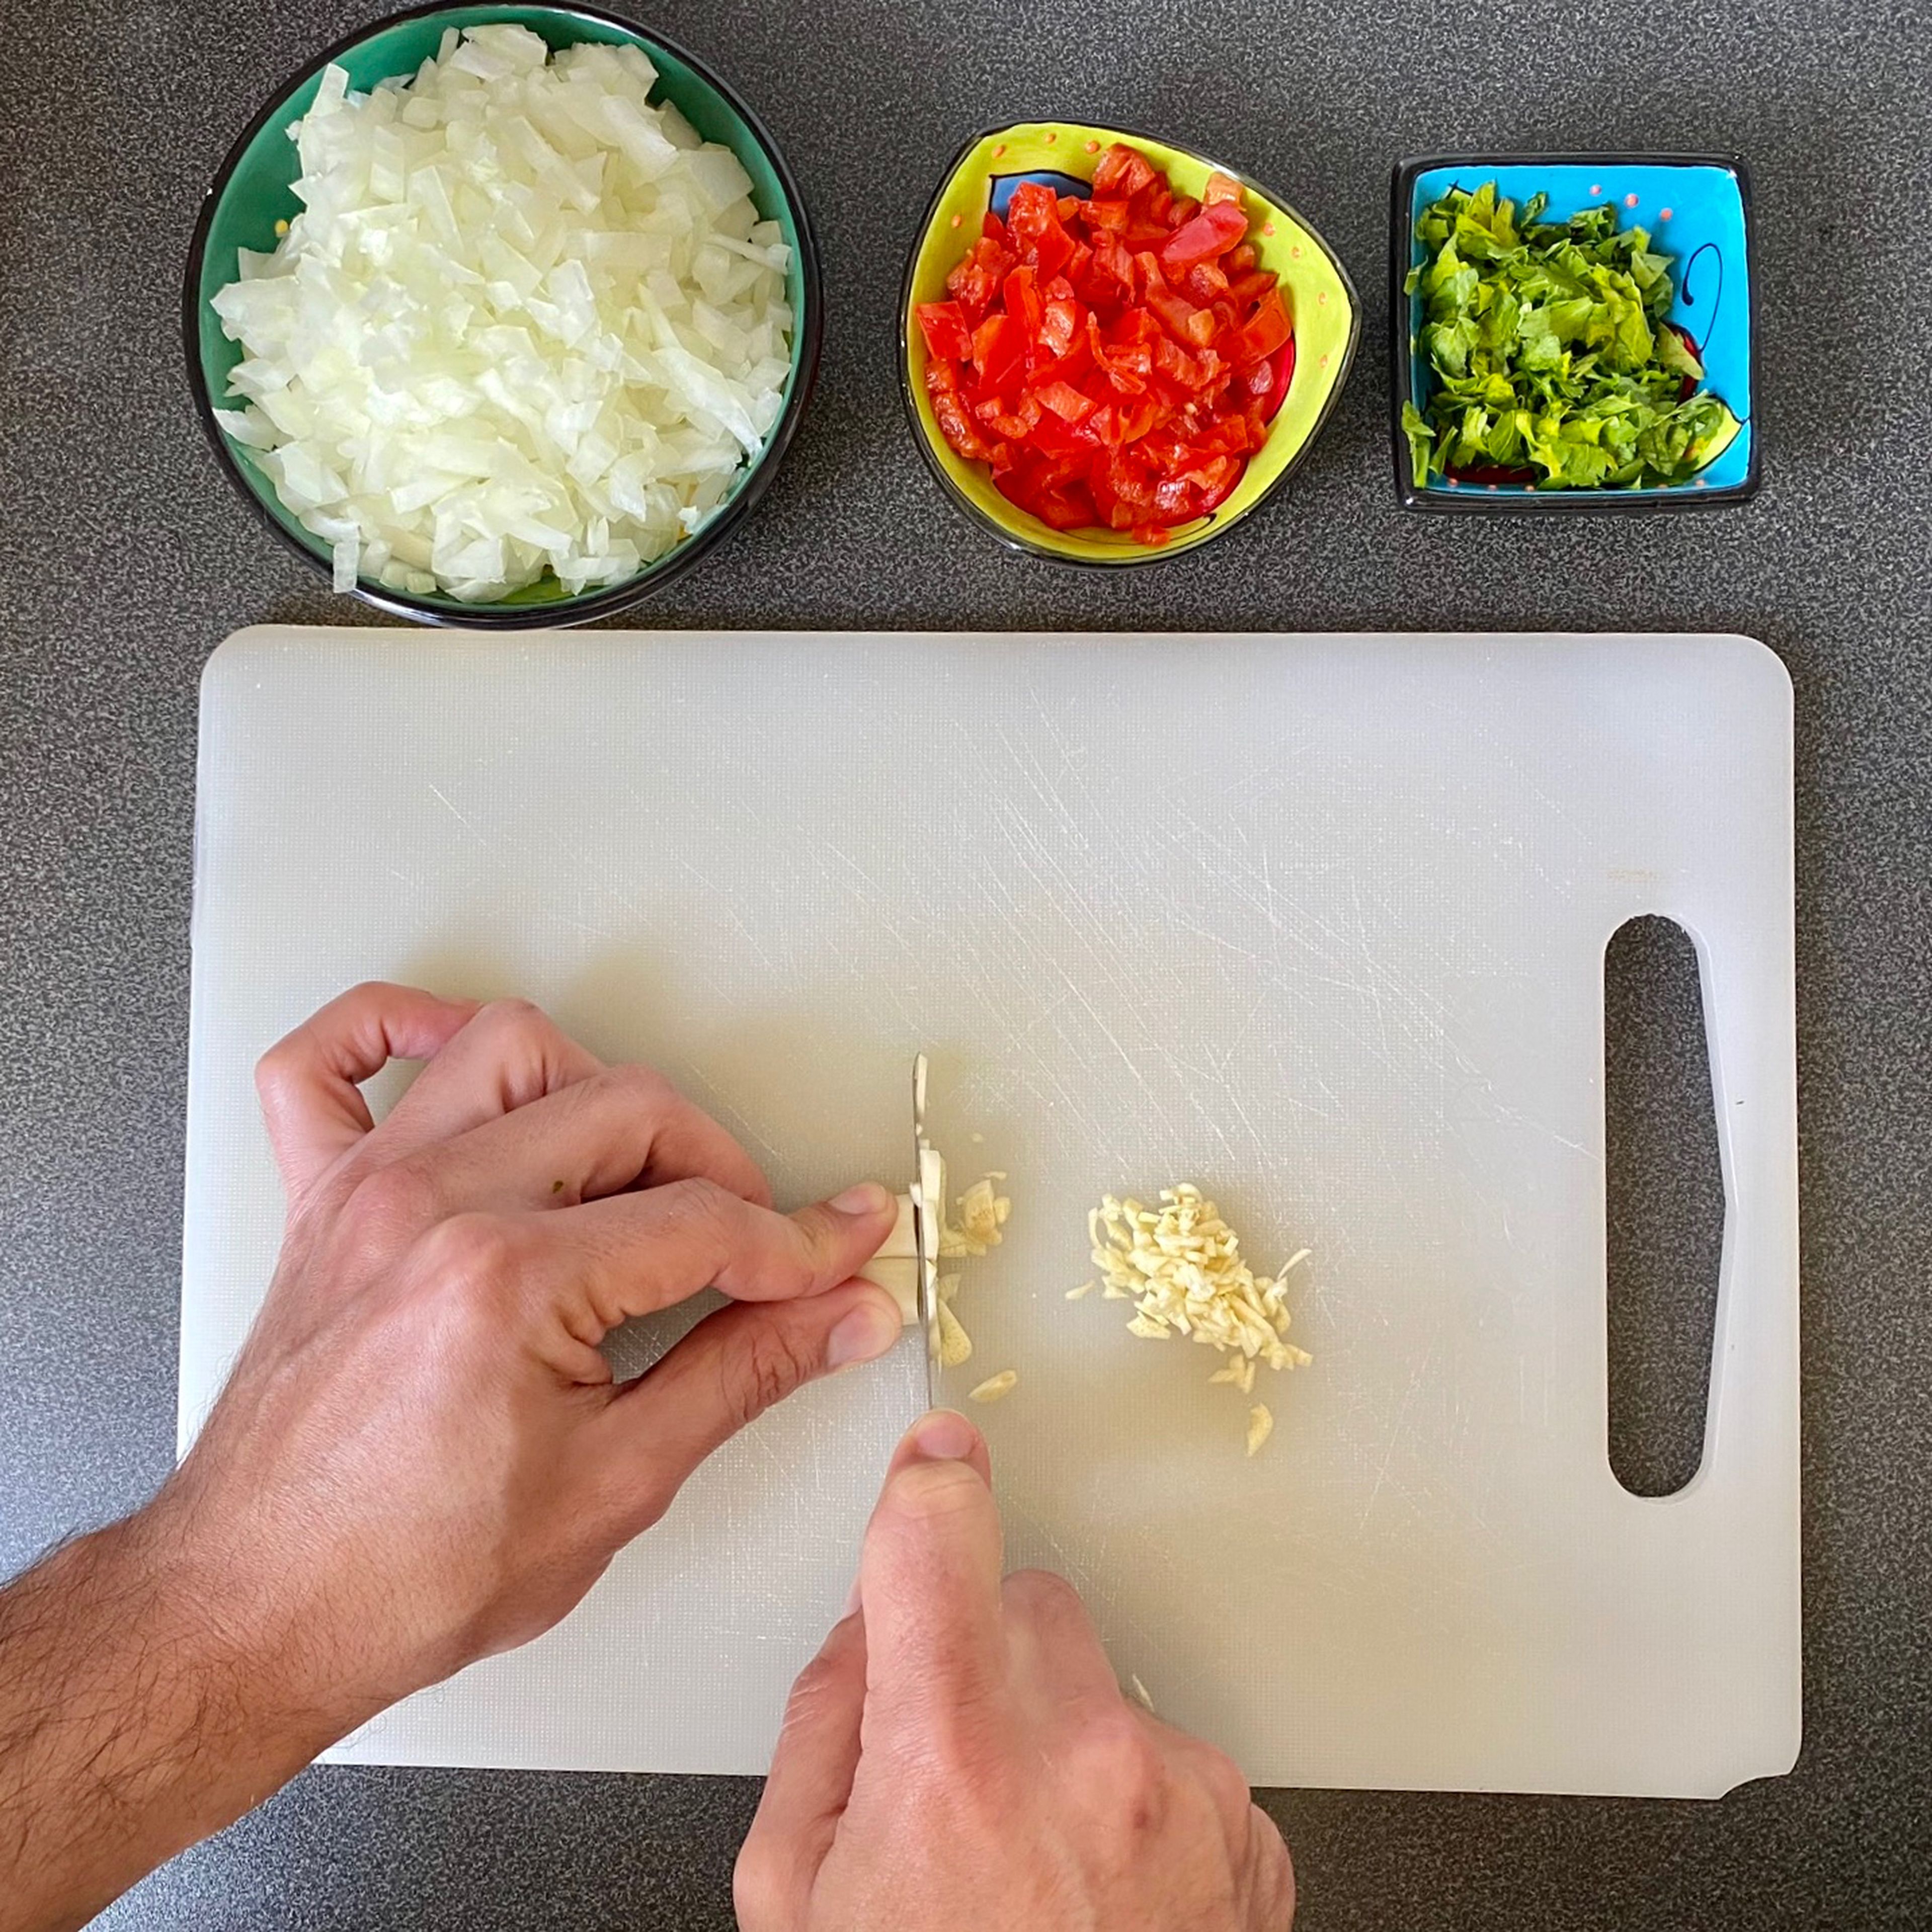 Chop the garlic, onion, parsley and peppers, remembering to remove their seeds. In a frying pan, brown the garlic and onion in the oil of your choice.